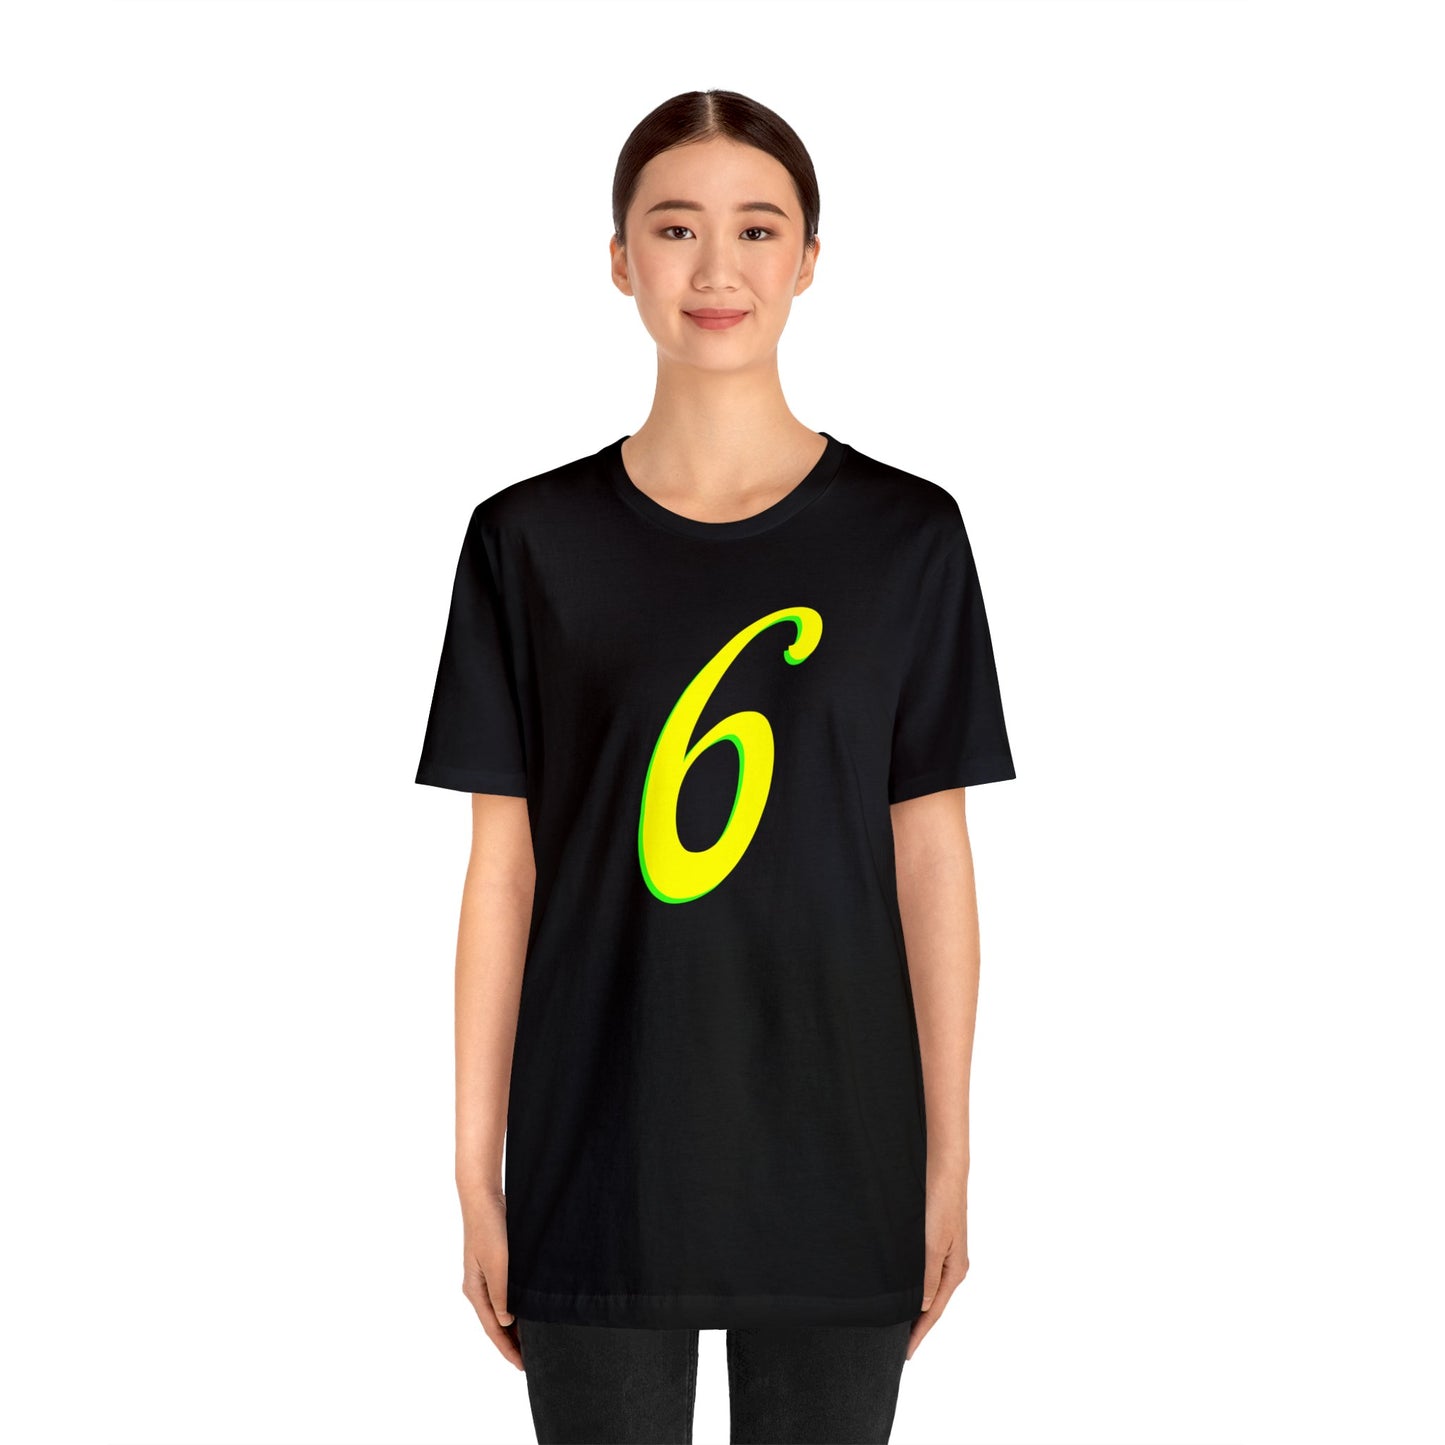 Number 6 Design - Soft Cotton Tee for birthdays and celebrations, Gift for friends and family, Multiple Options by clothezy.com in Black Size Medium - Buy Now